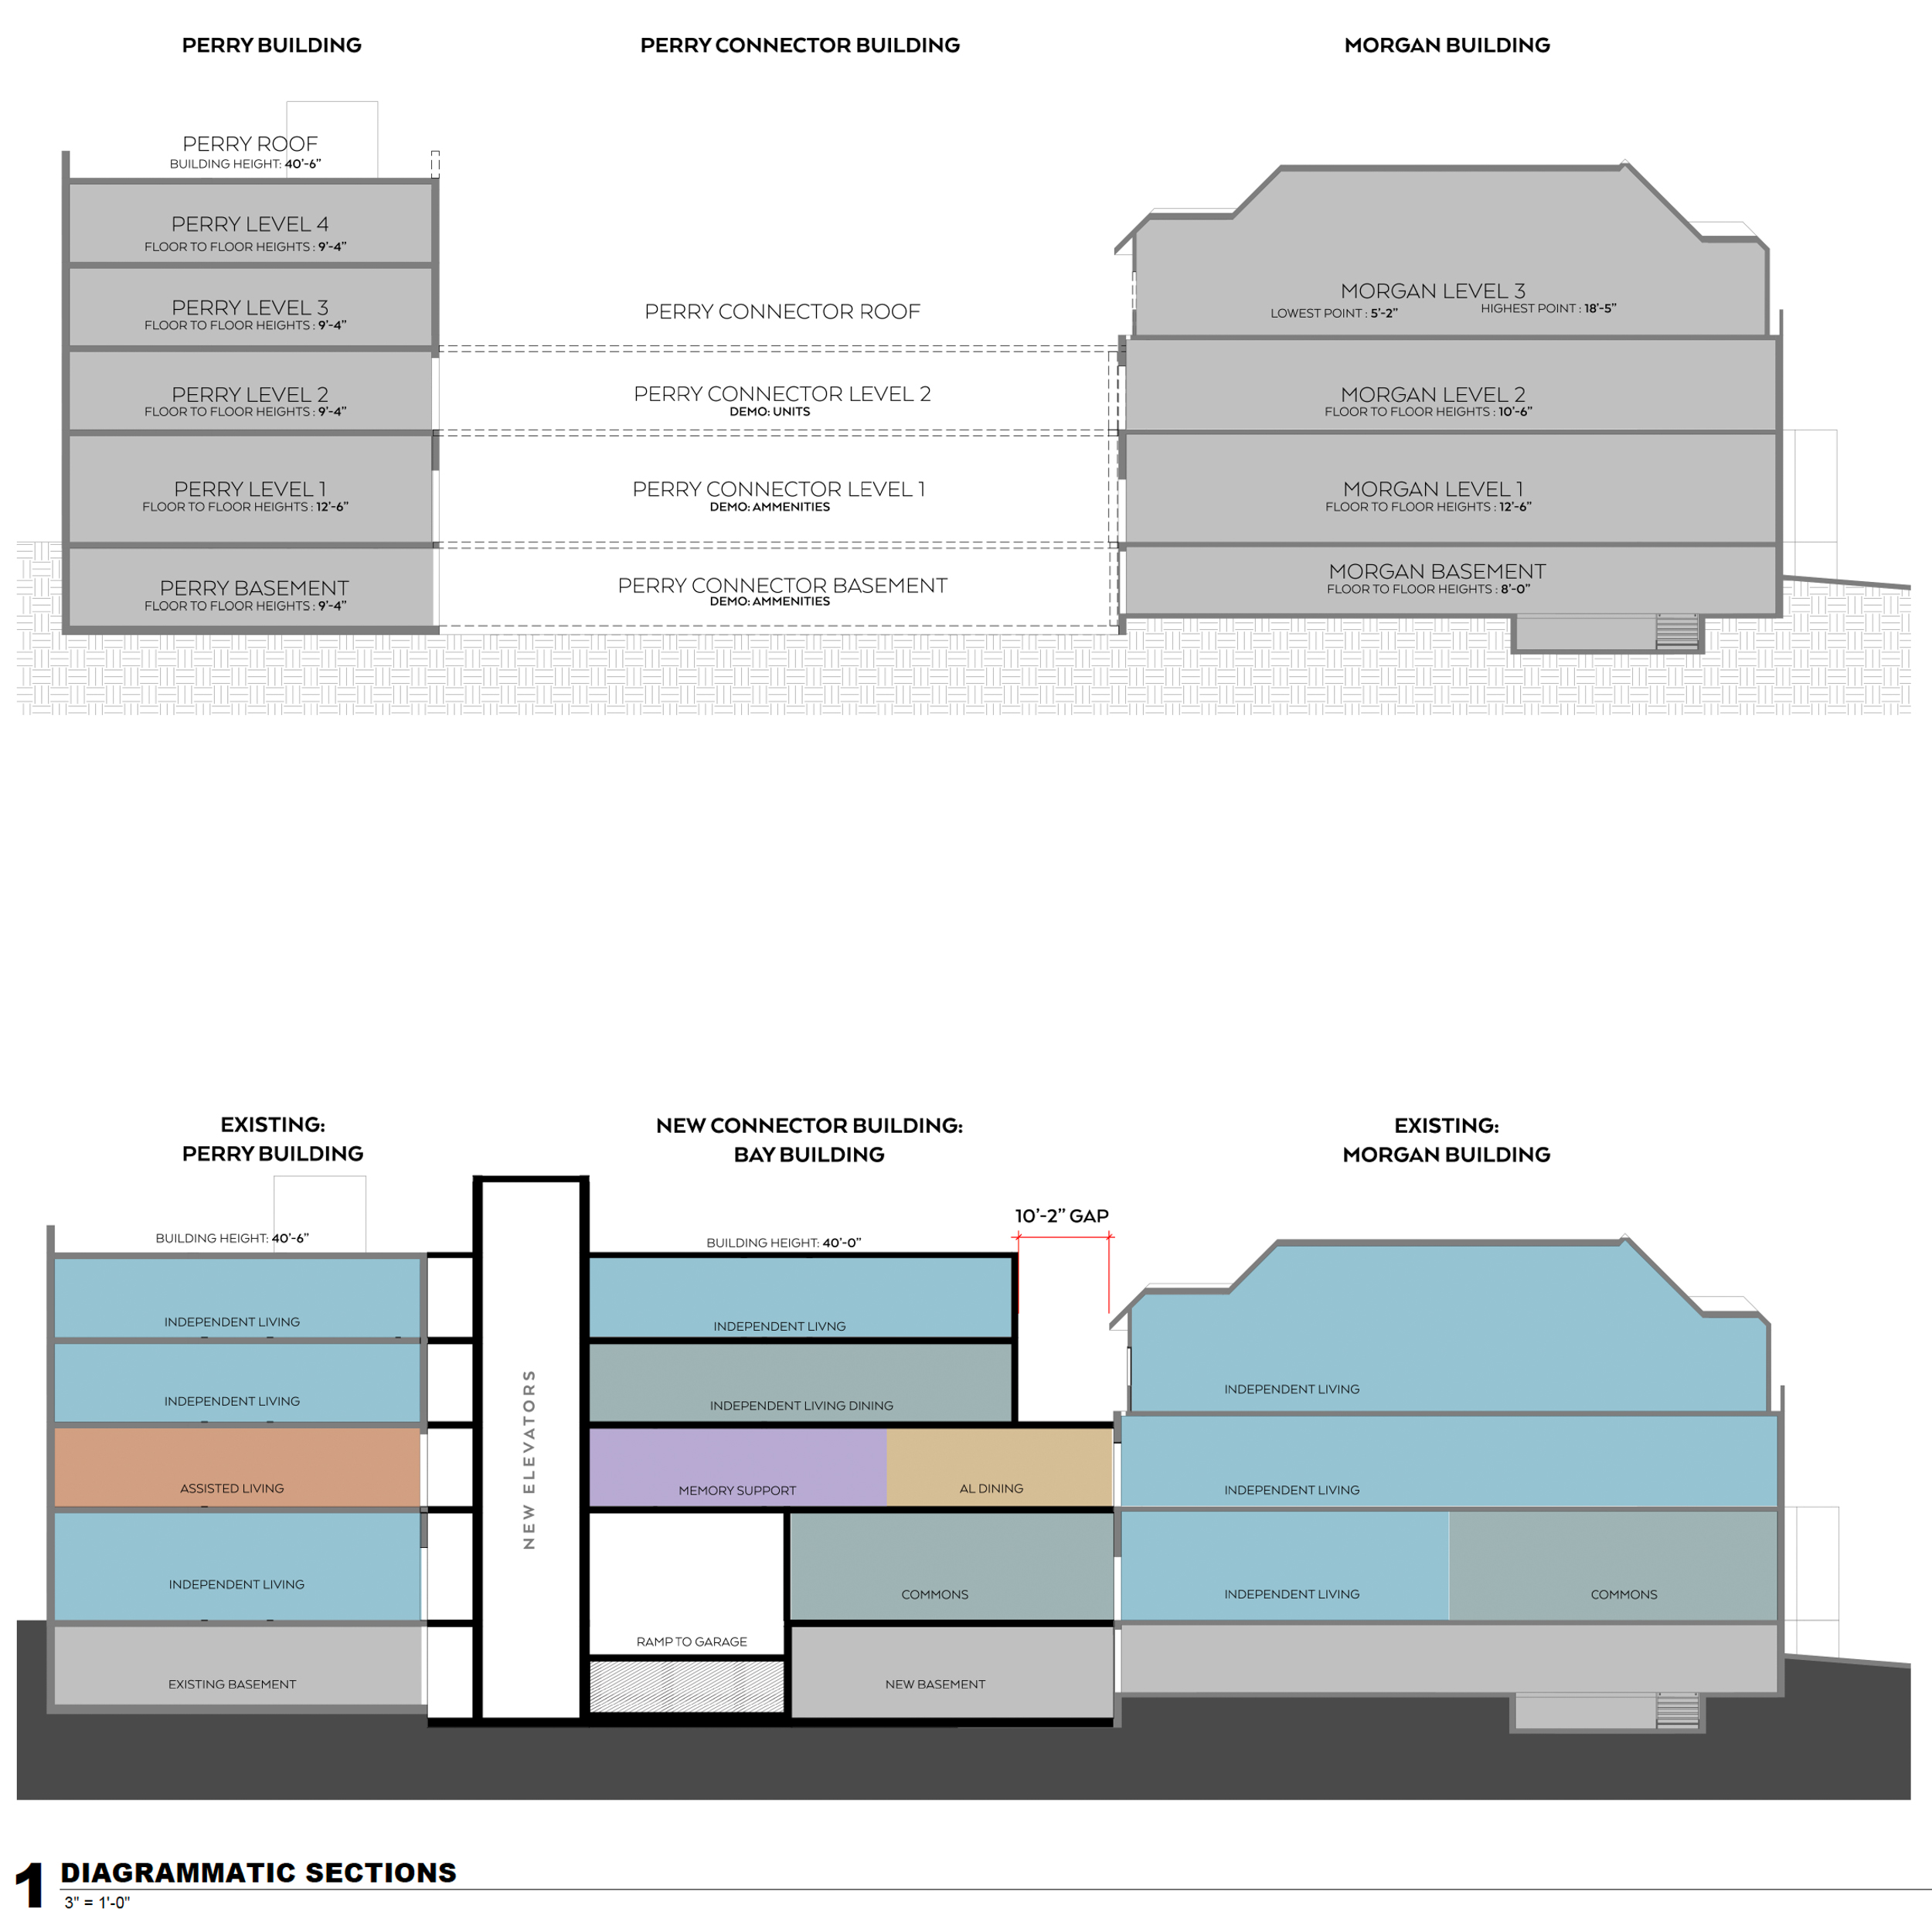 Heritage on the Marina diagrammatic sections of the existing and proposed alteration, illustration by HKS Architects